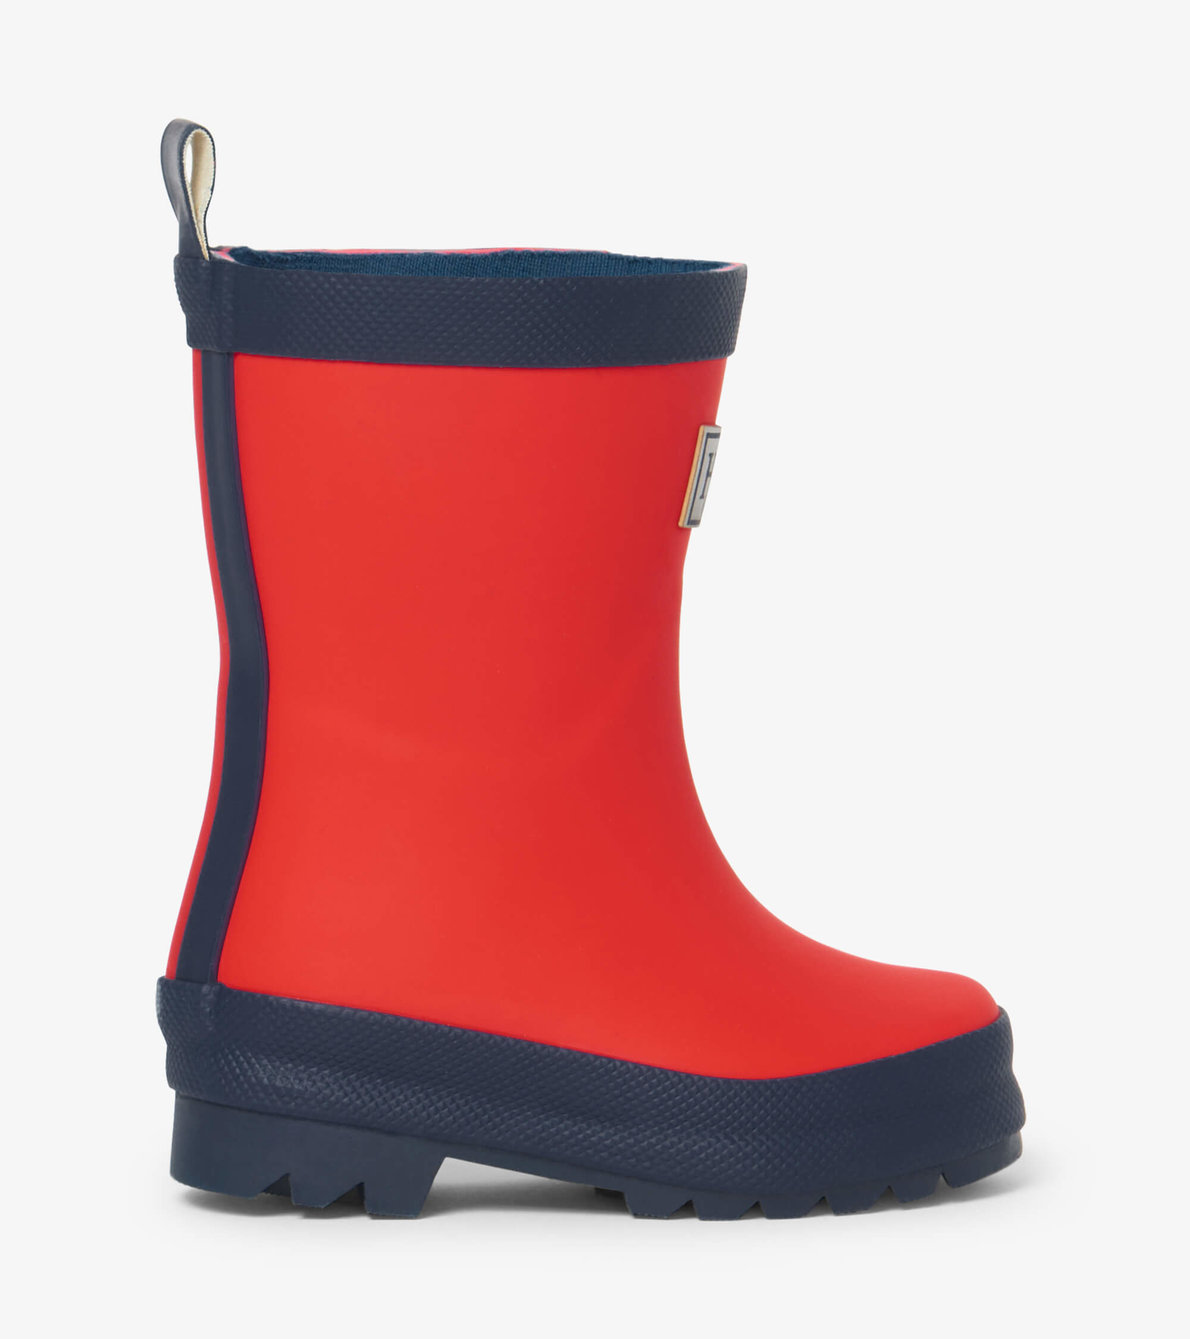 View larger image of My 1st Rain Boots - Red & Navy